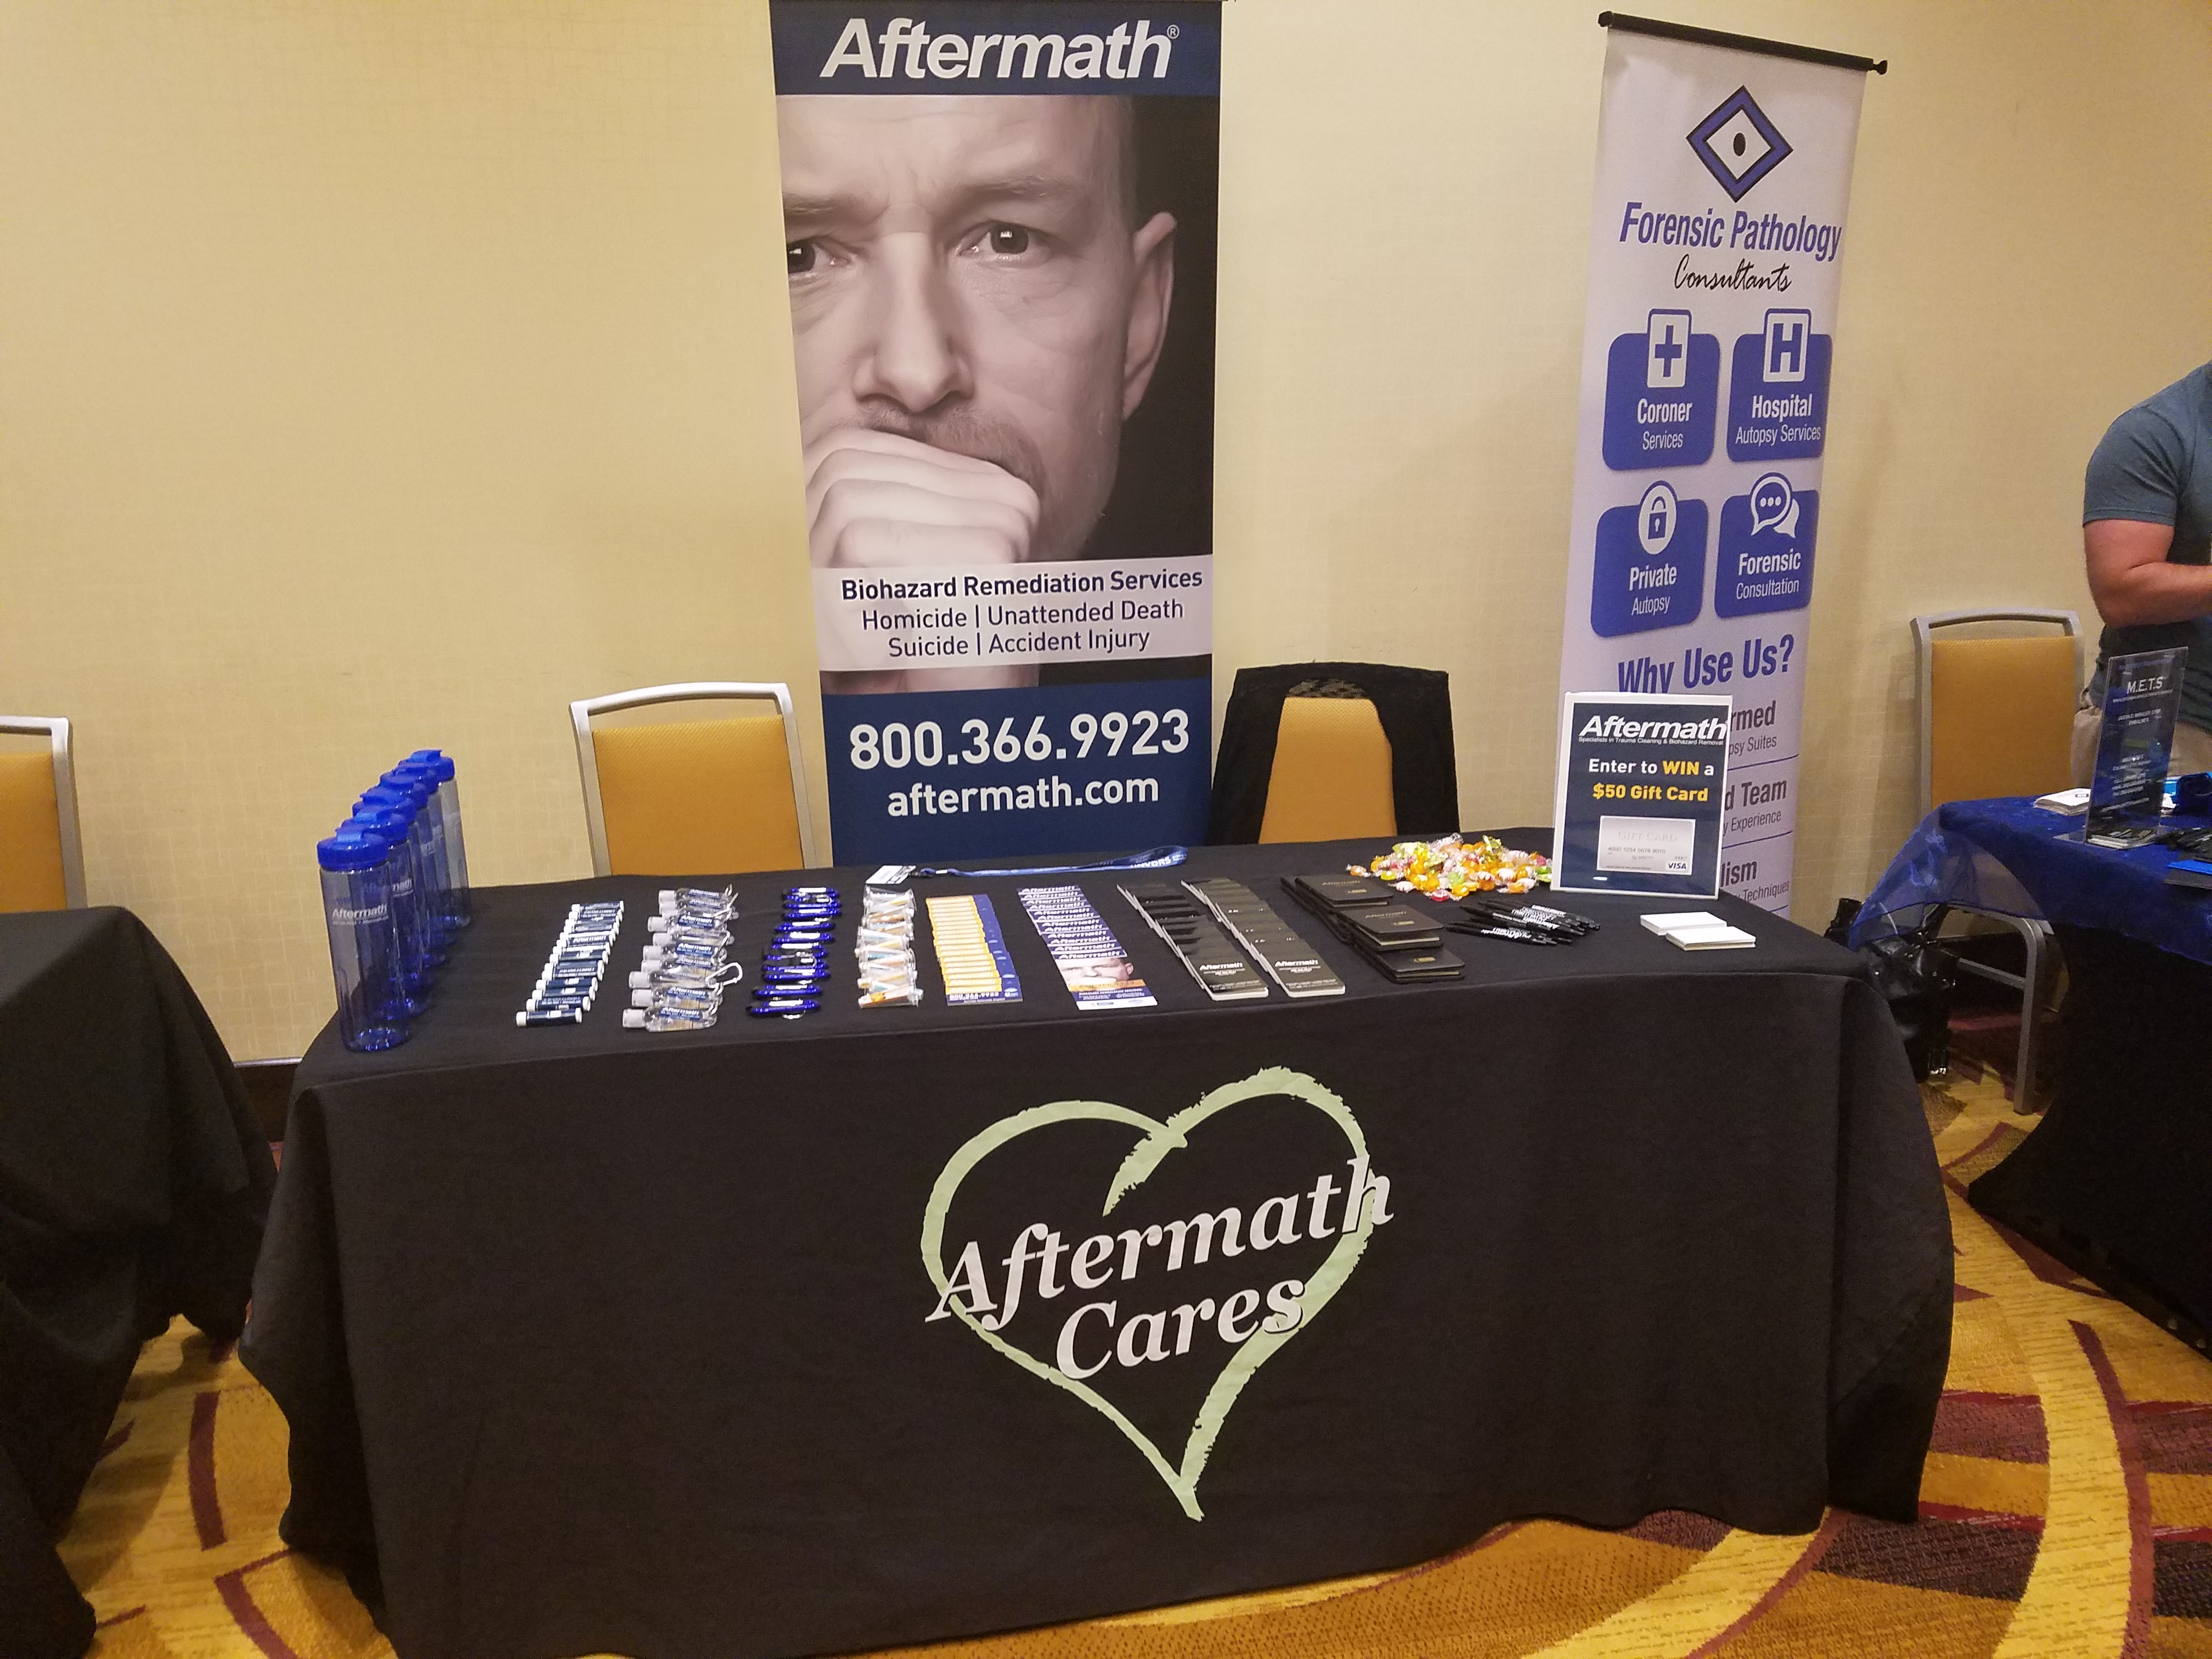 Aftermath booth at Dr. Avolt Training Conference in Indianapolis.